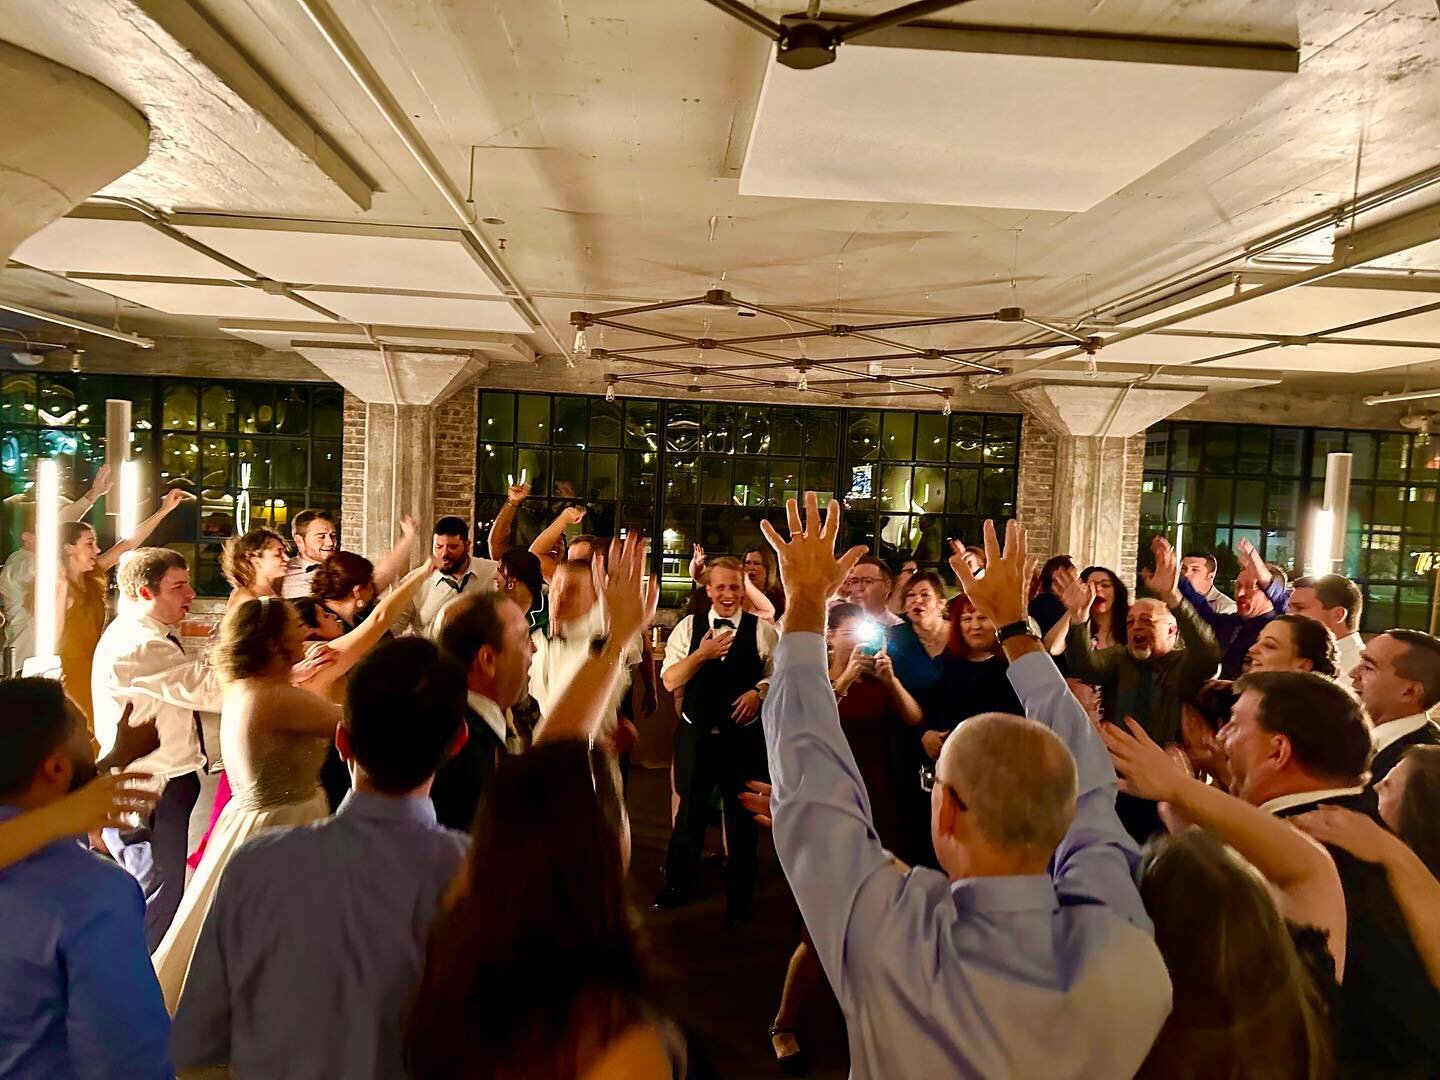 If the turkey is good this year, put your hand up in the air!

Happy Thanksgiving, Instagram fam!

#djlife #ddjt #iowawedding #iowaweddingpro #djclife